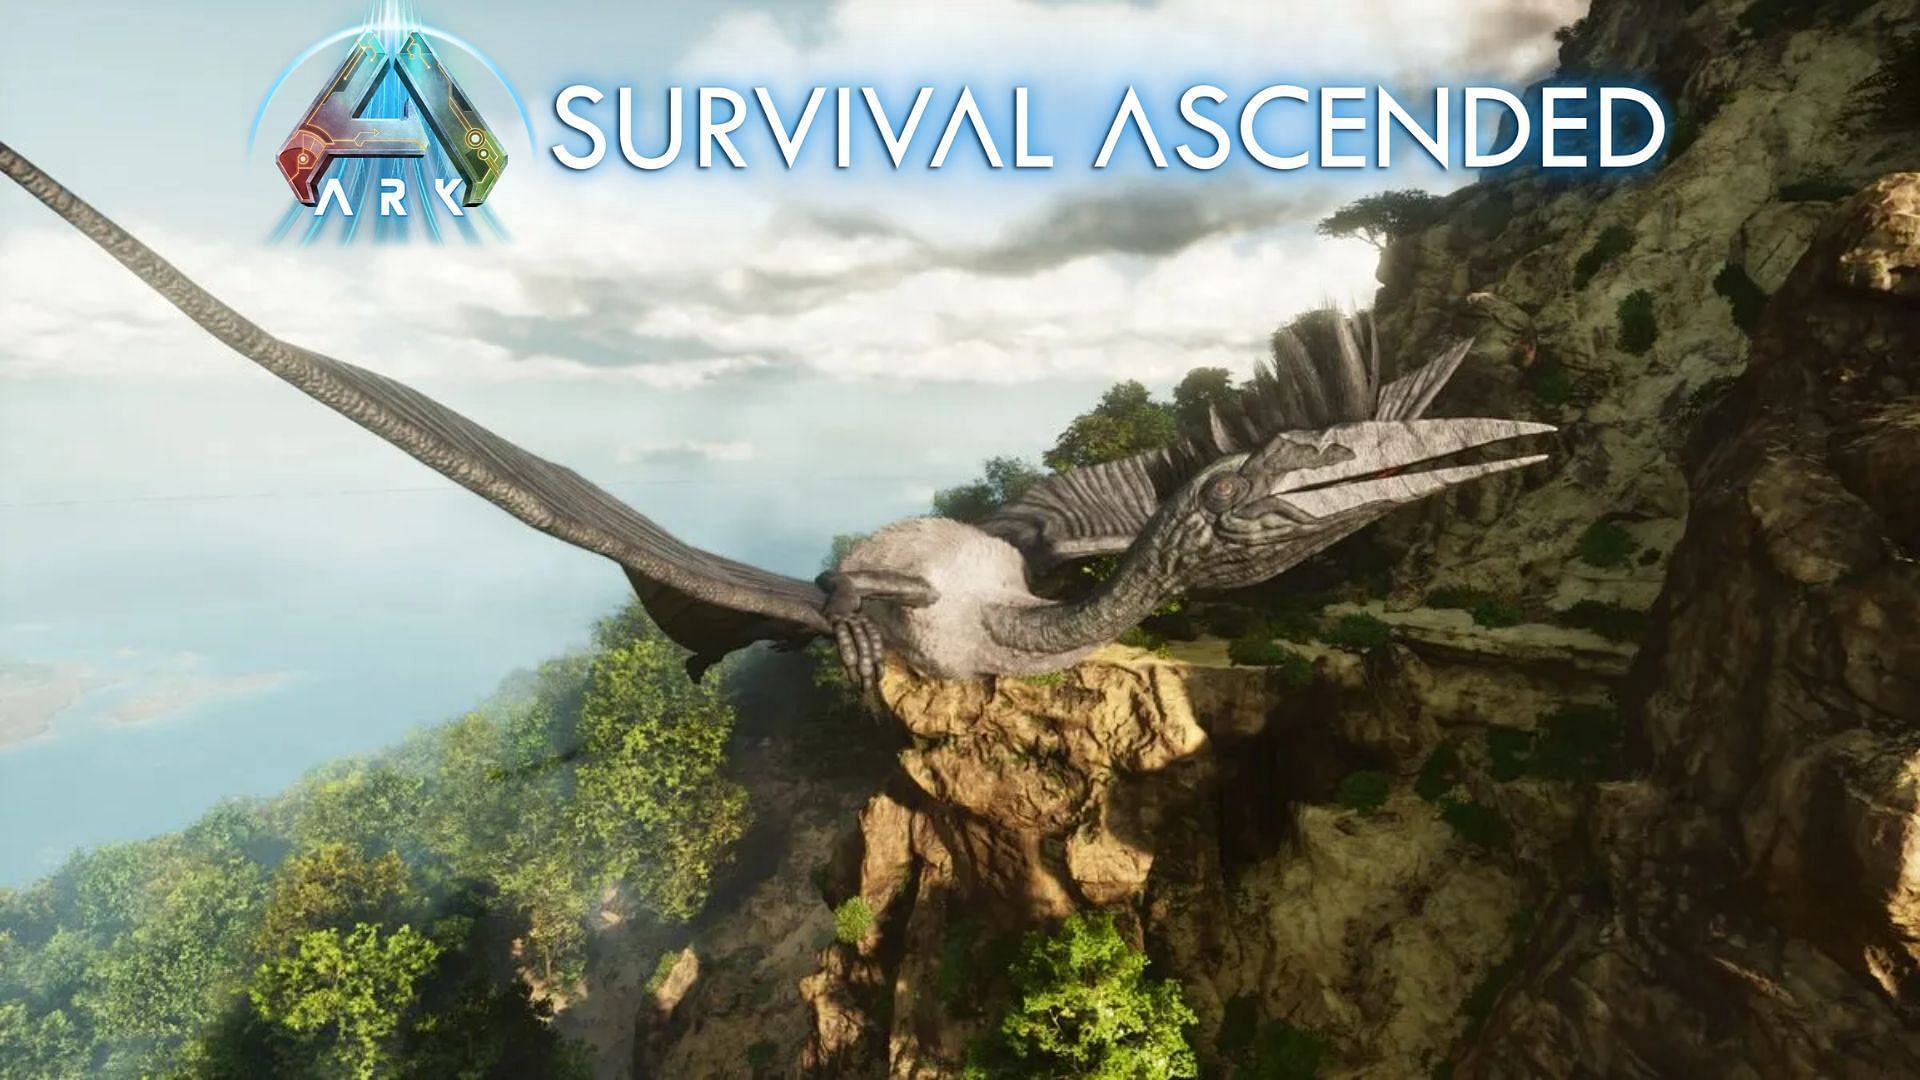 Players can build a base on Quetzal&#039;s back (Image via Studio Wildcard)